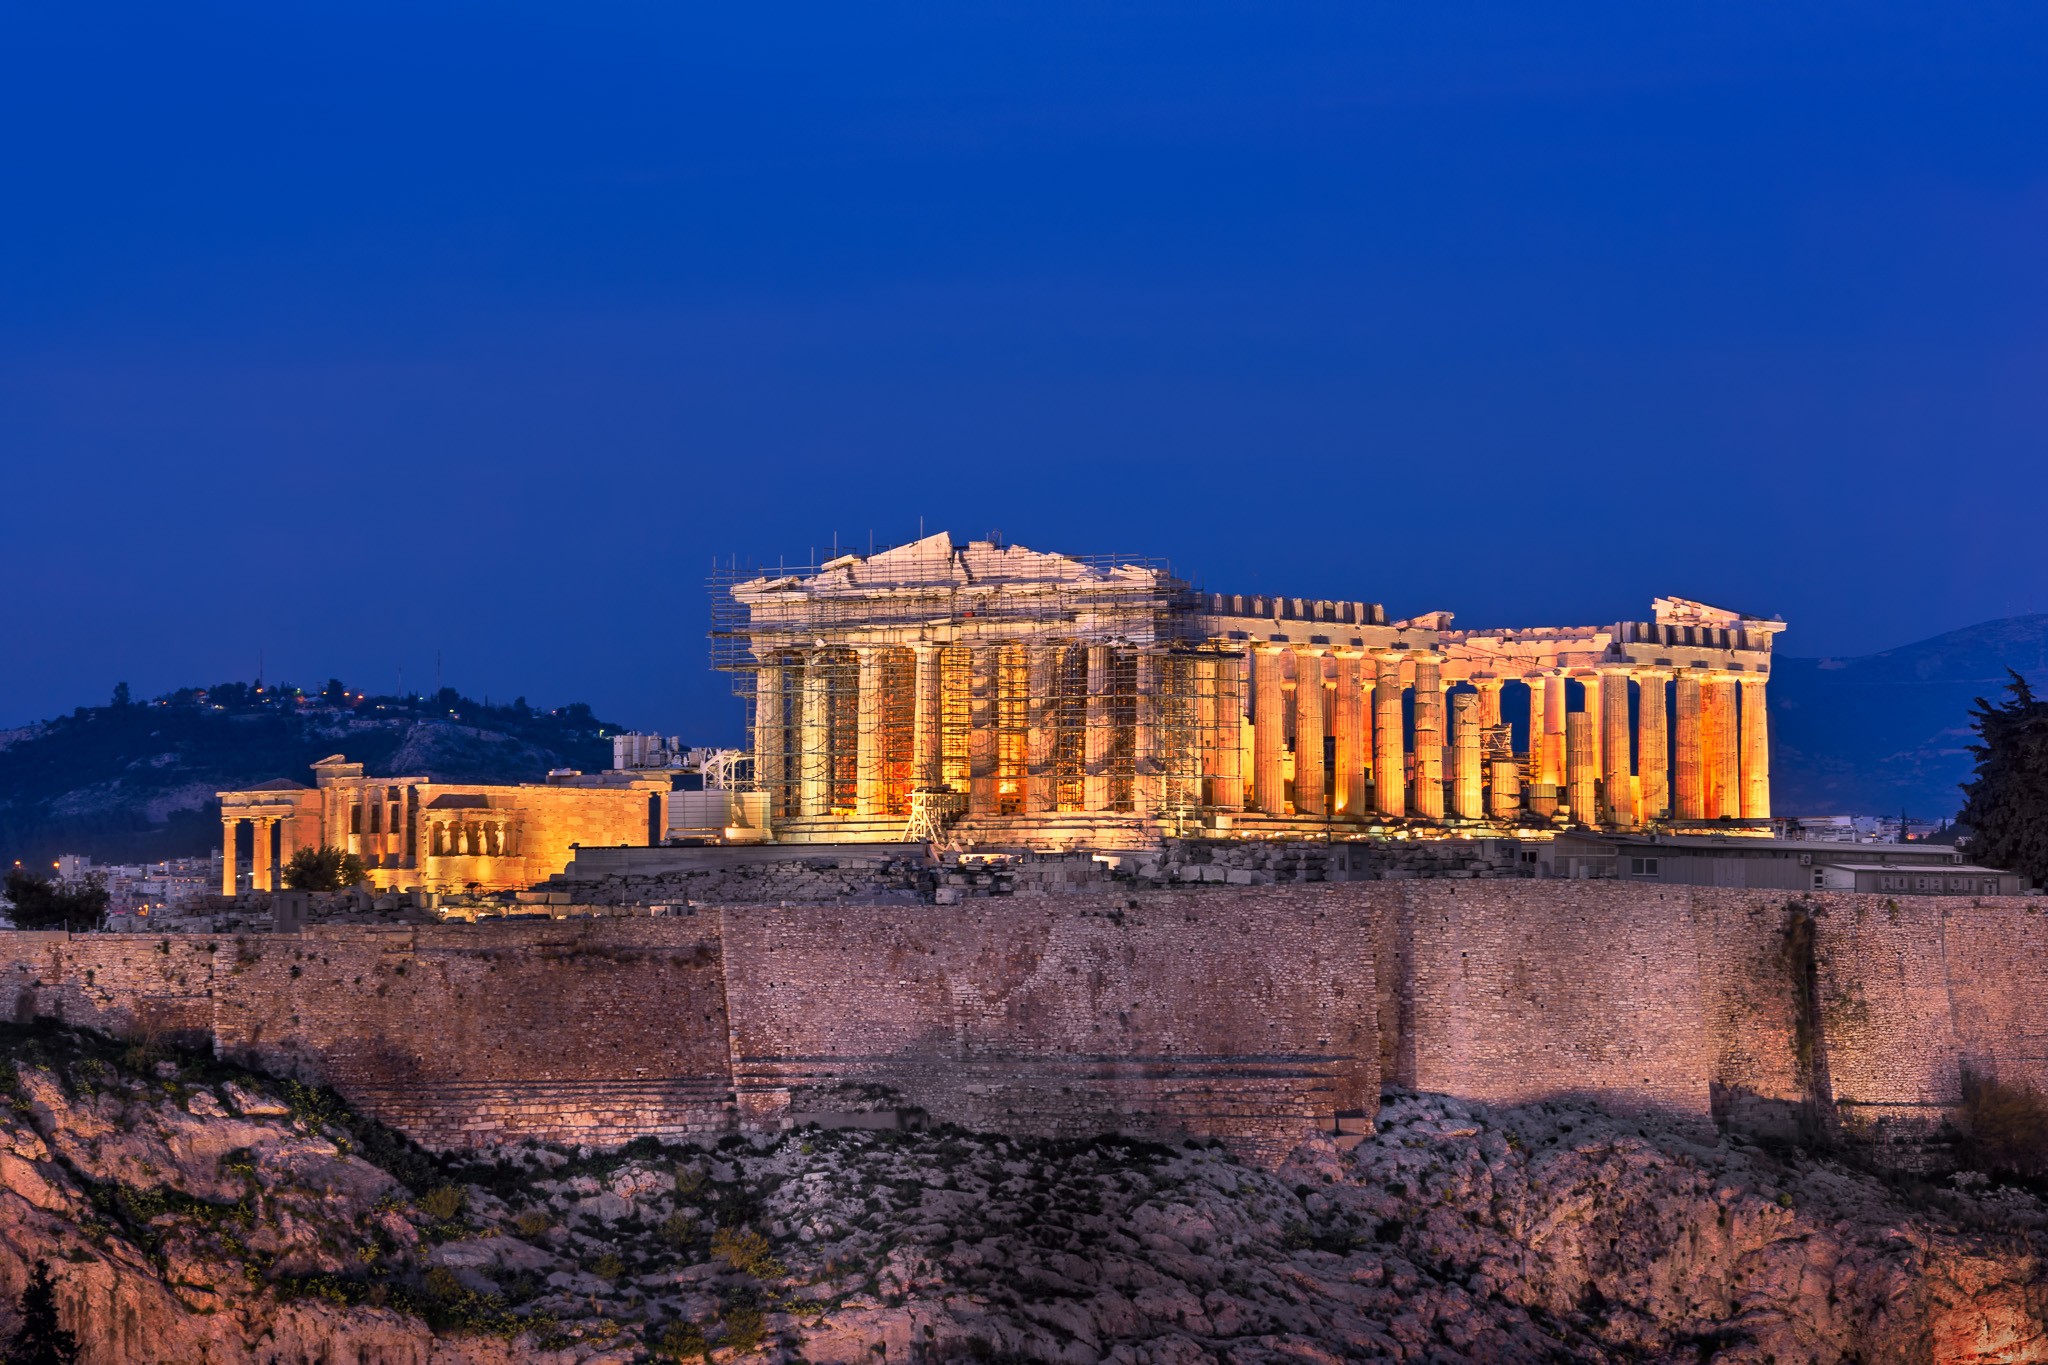 View of Acropolis and Parthenon from the Philopappos Hill in the